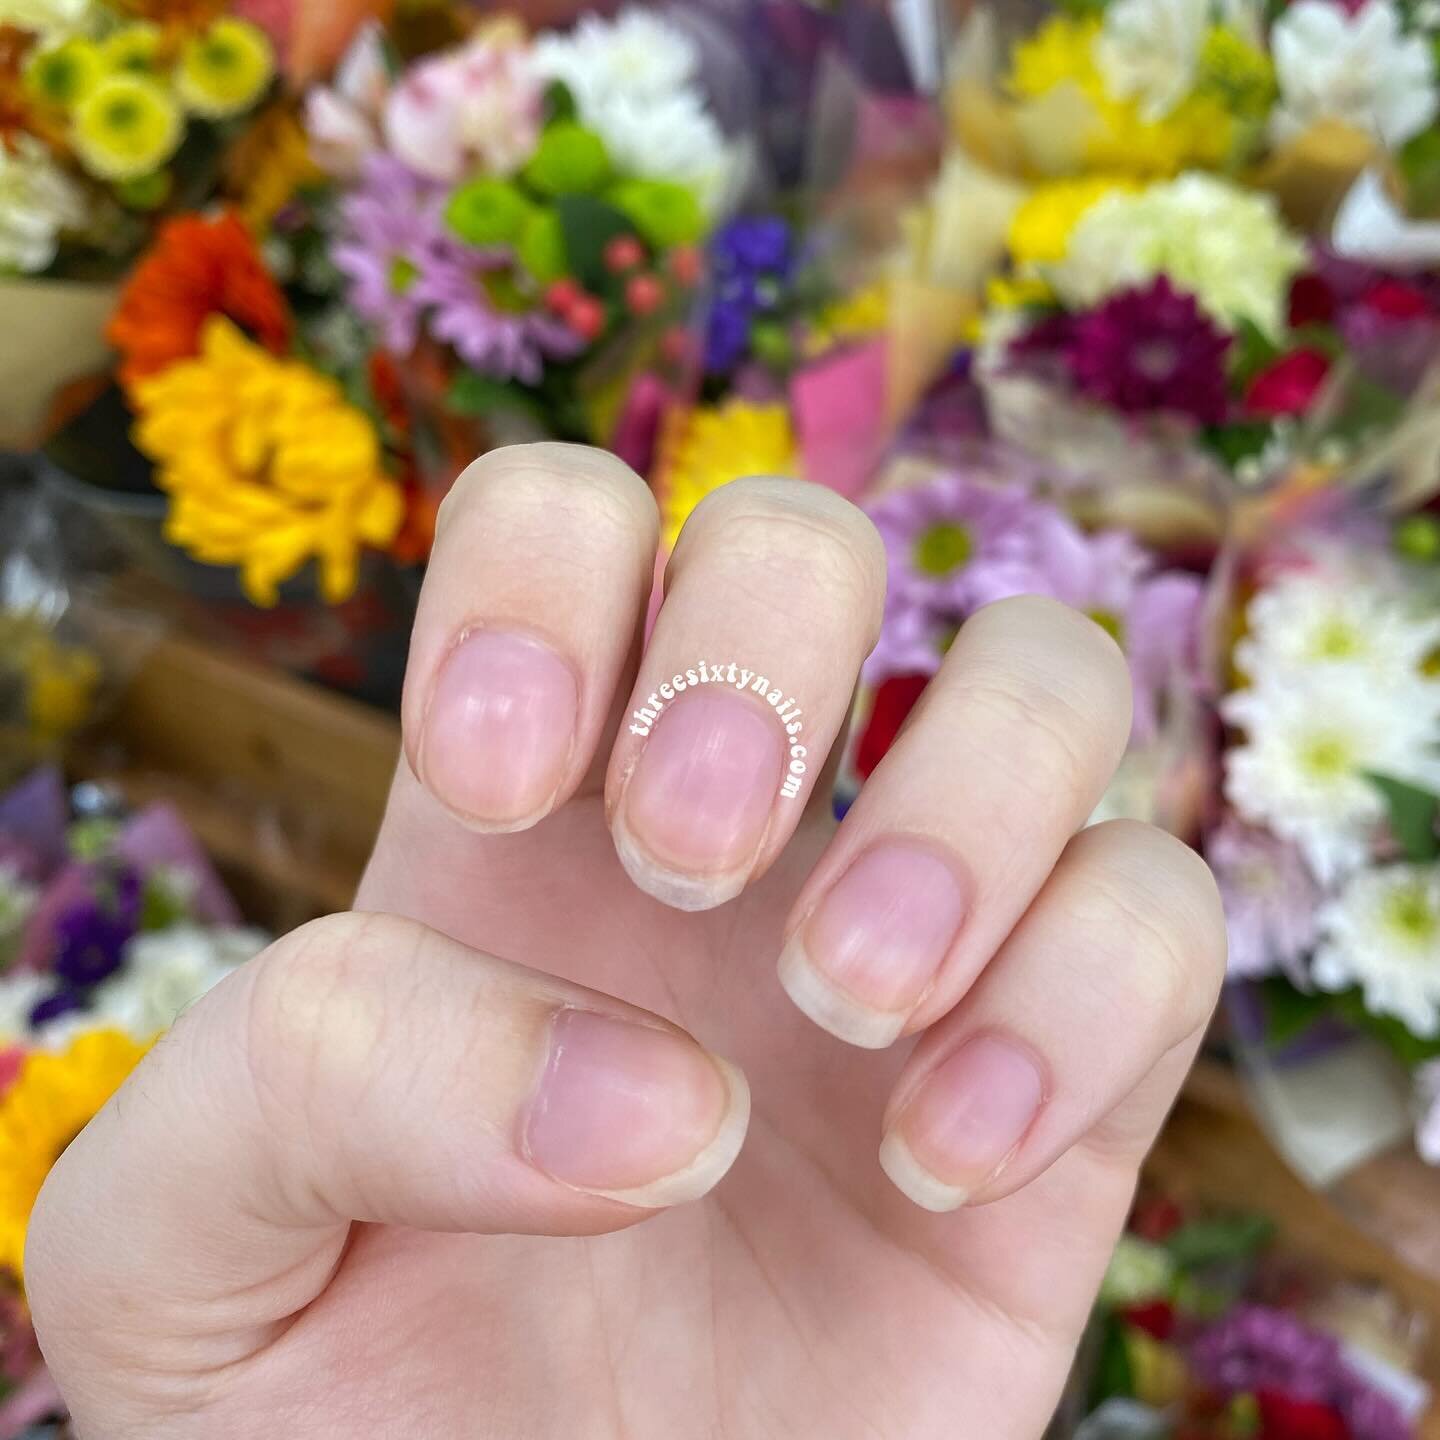 I was going through my camera roll today as I worked on my 2023 Nail Art Recap video (coming soon!) and I stumbled upon this natural &ldquo;nailfie&rdquo; that I never posted! 🤗

I LOVE the pretty flowers in the background and this is one of those t